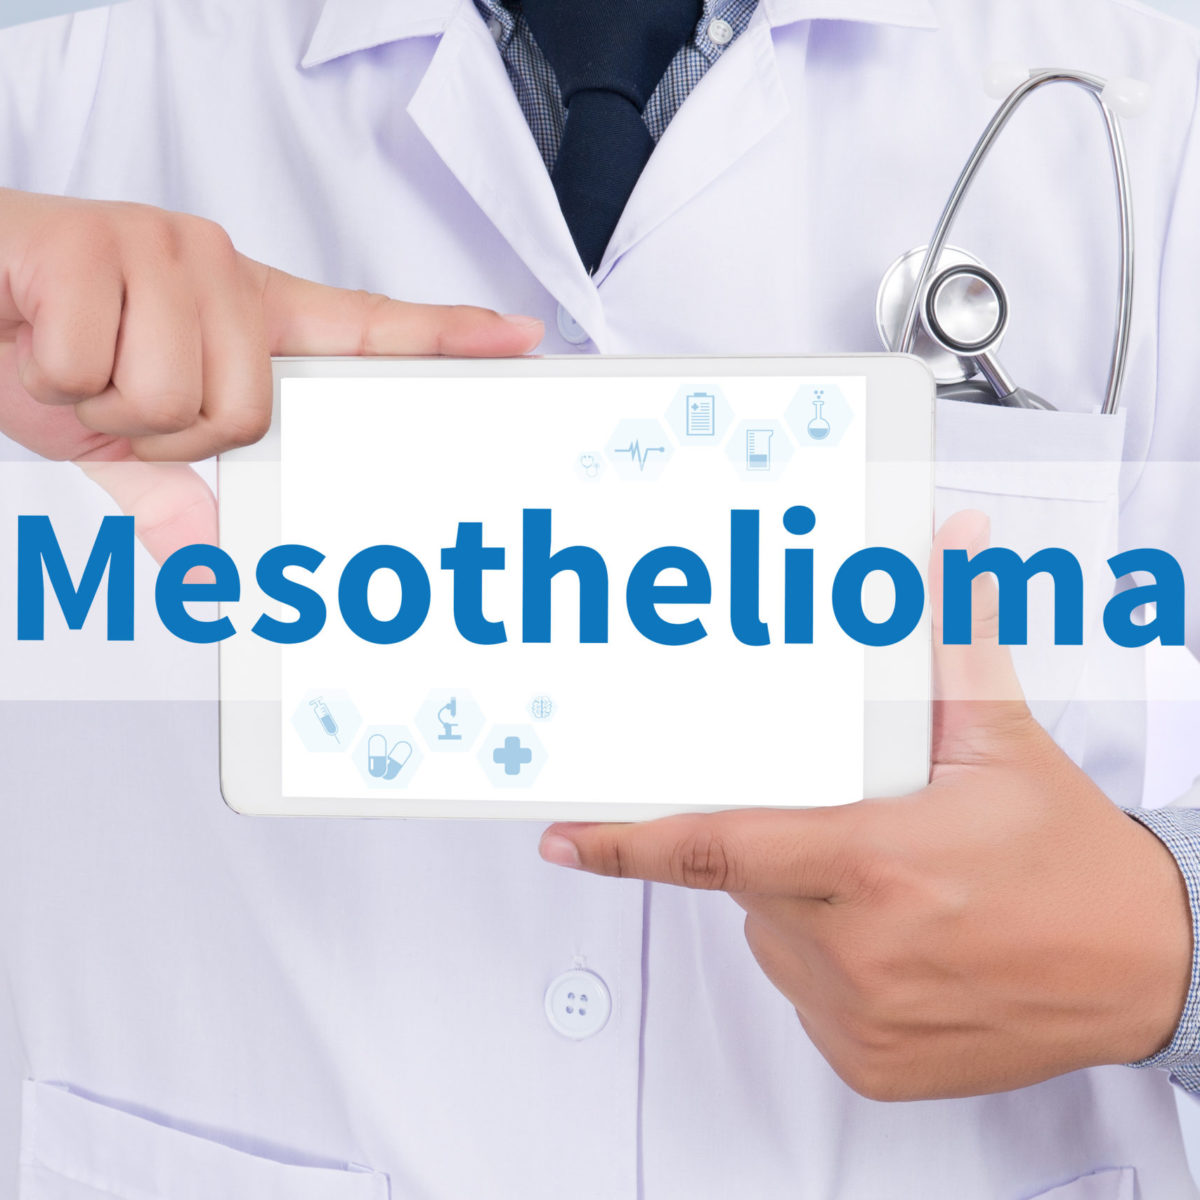 mesothelioma cells by